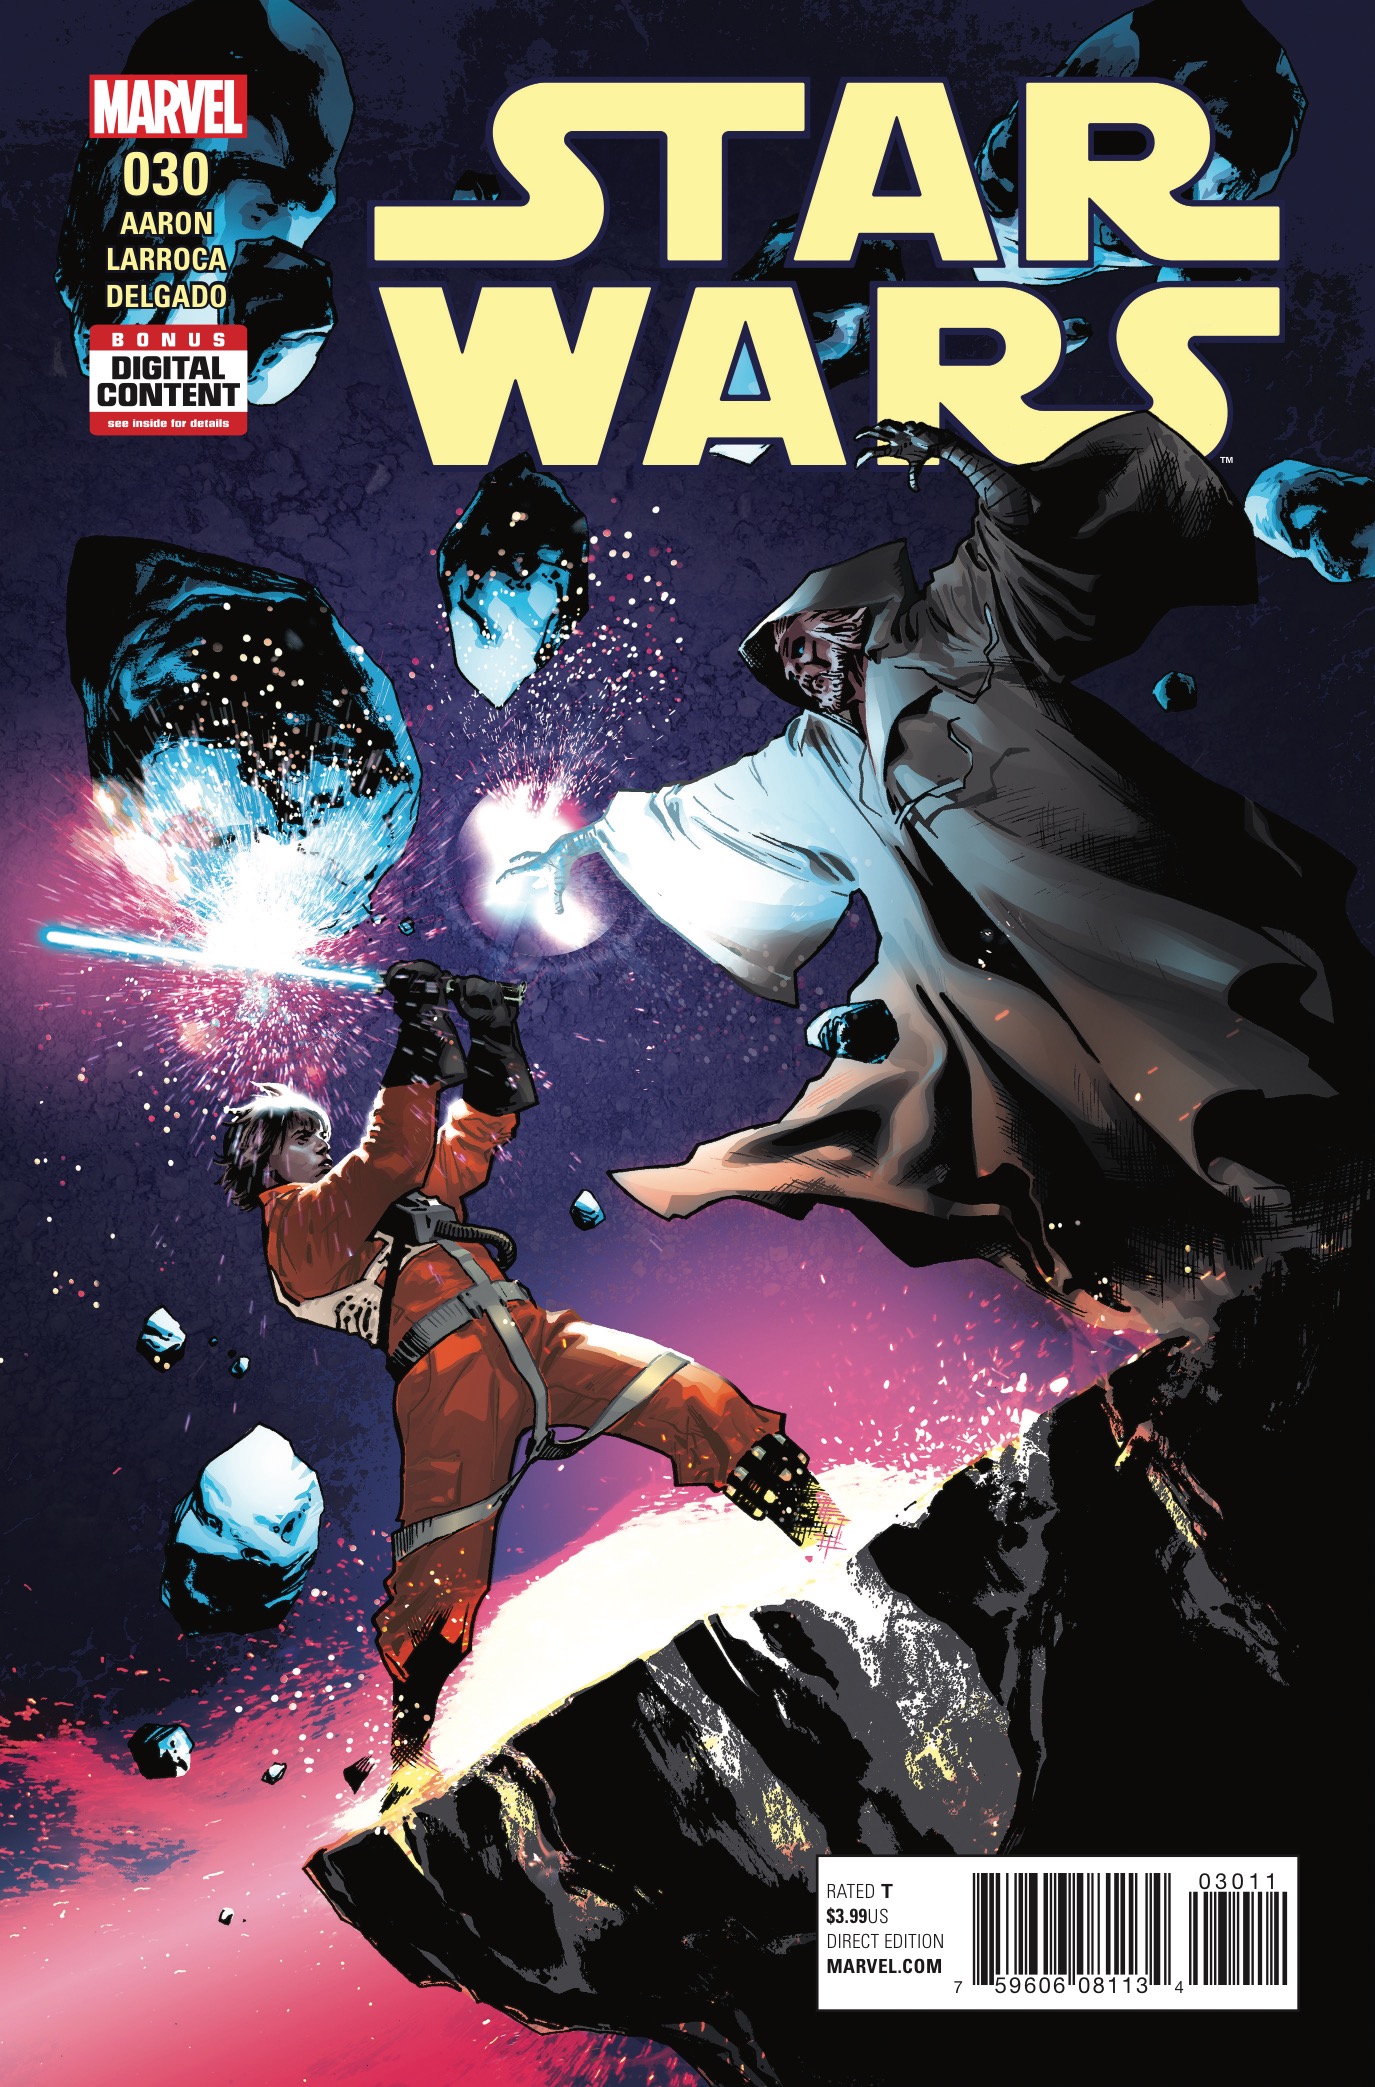 Star Wars #30 Review